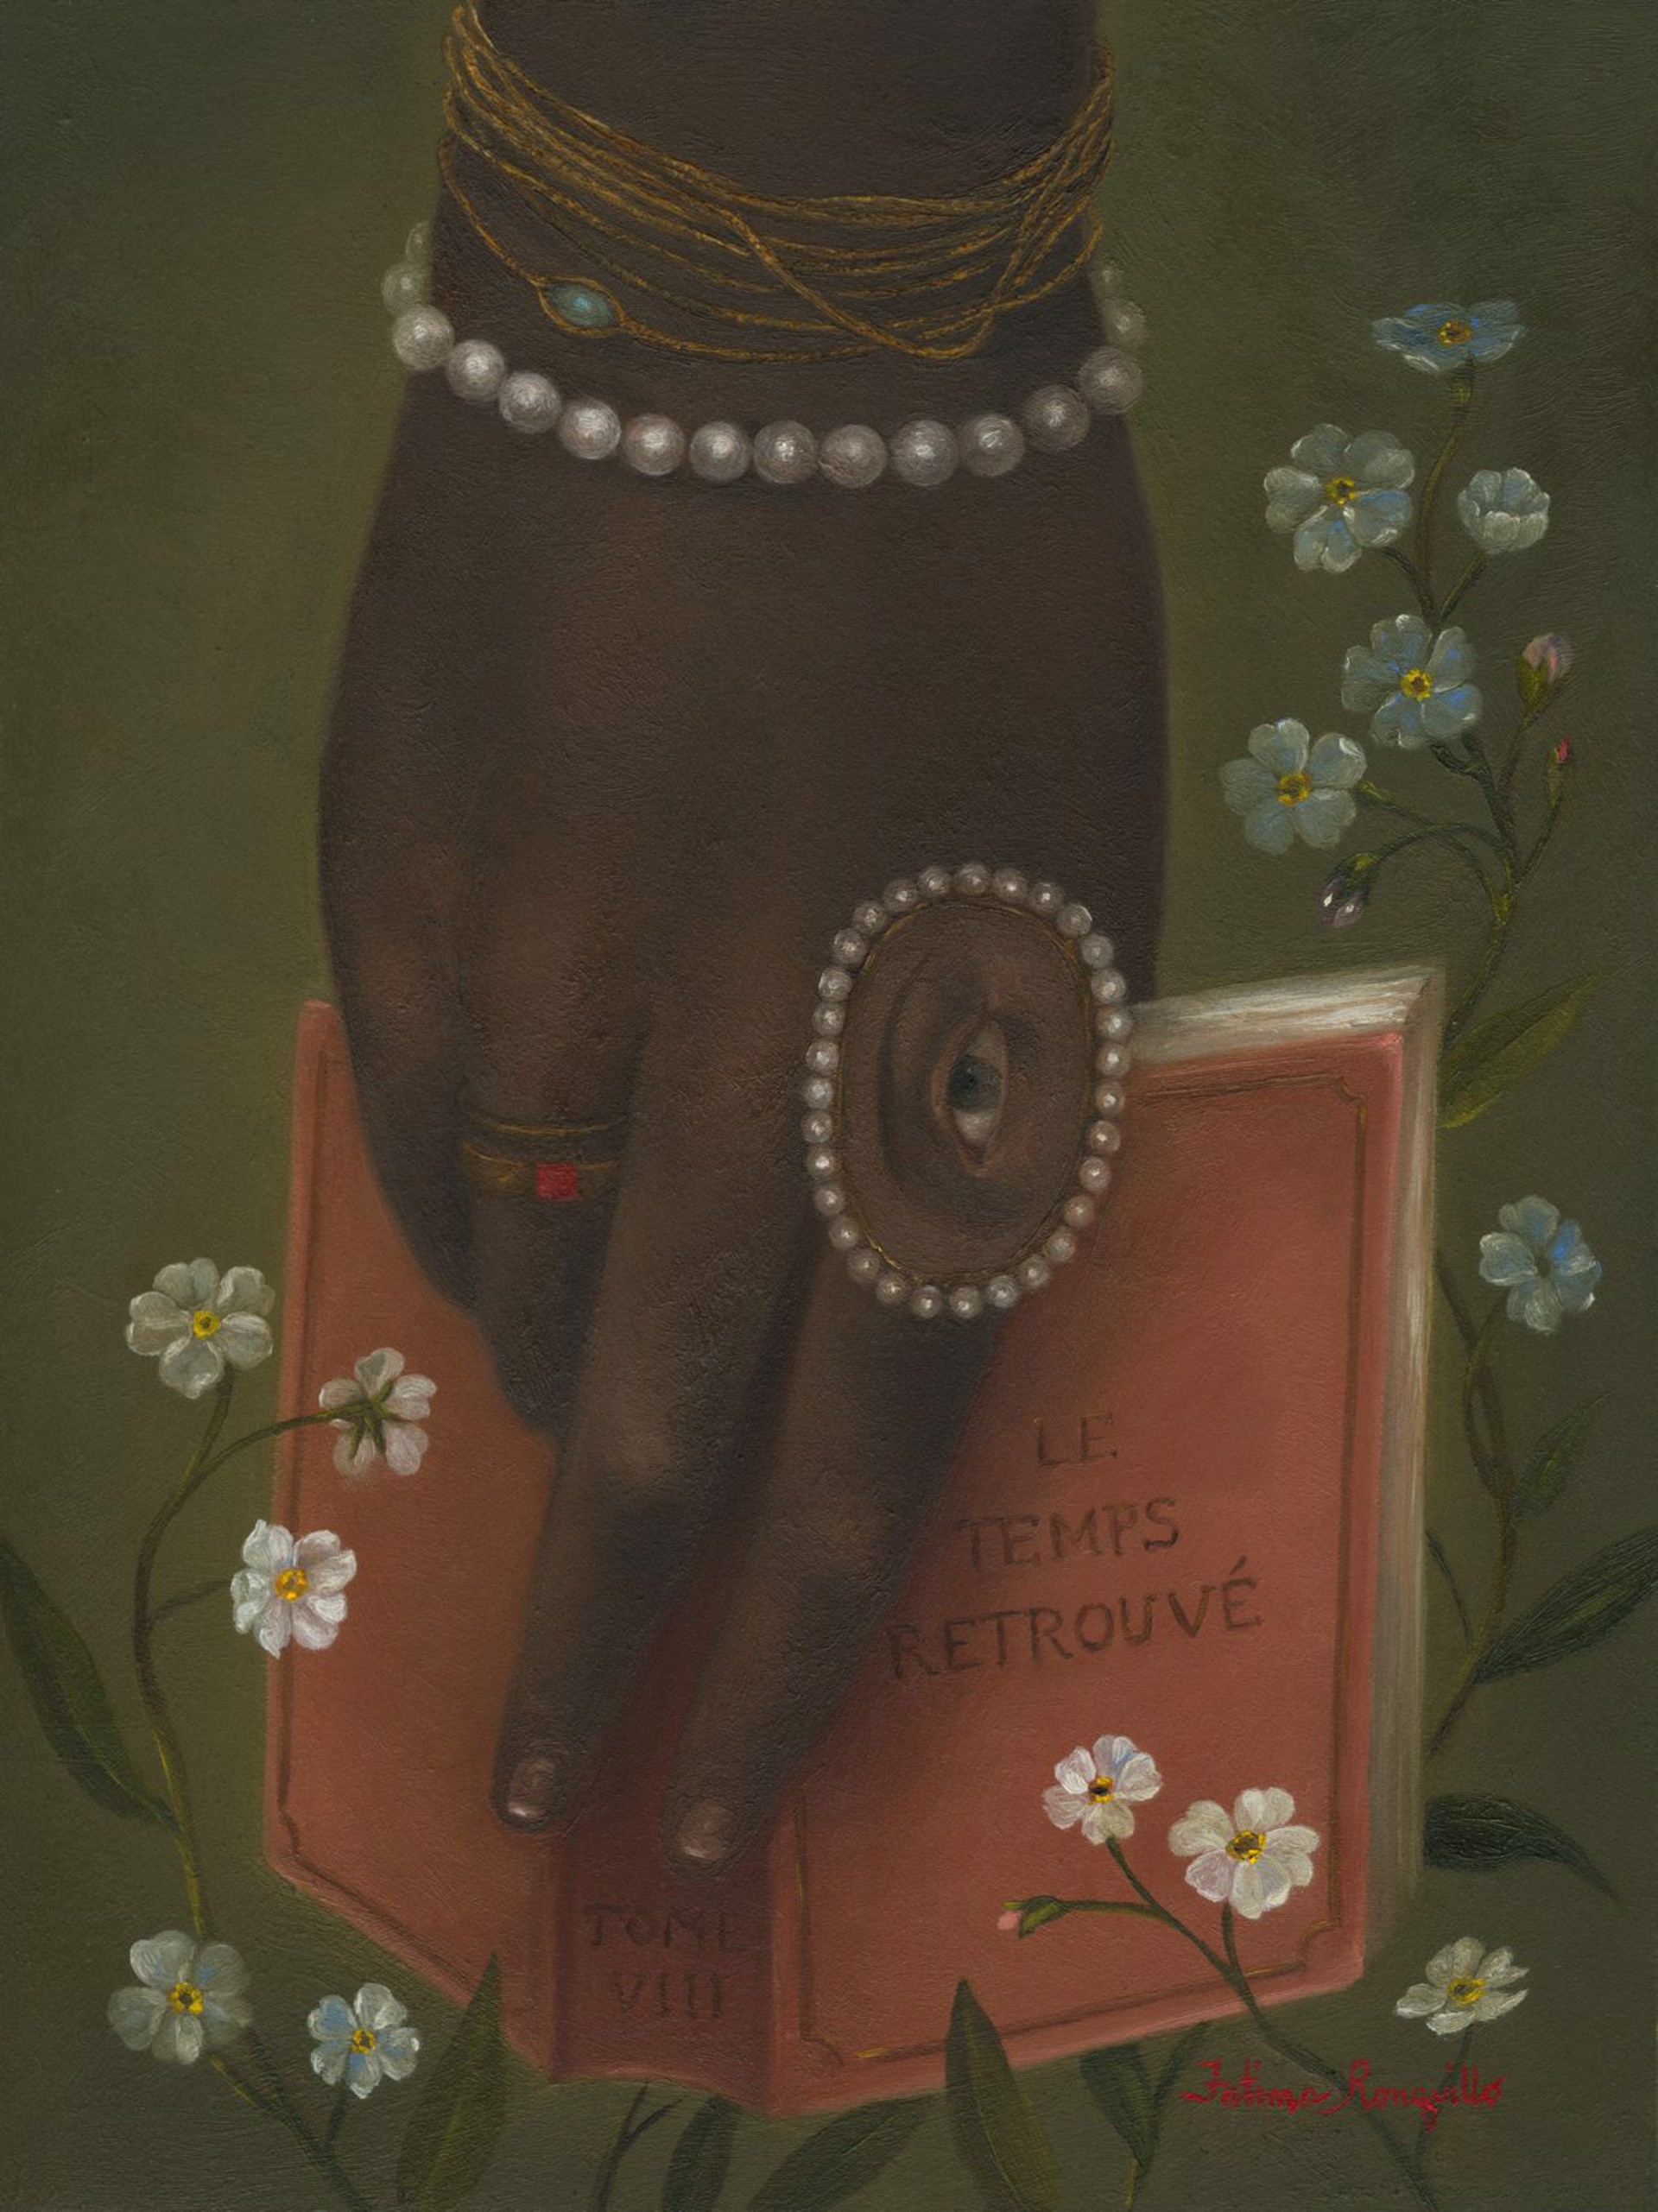 Time Regained: Hand with Proust and Forget Me Nots by Fatima Ronquillo